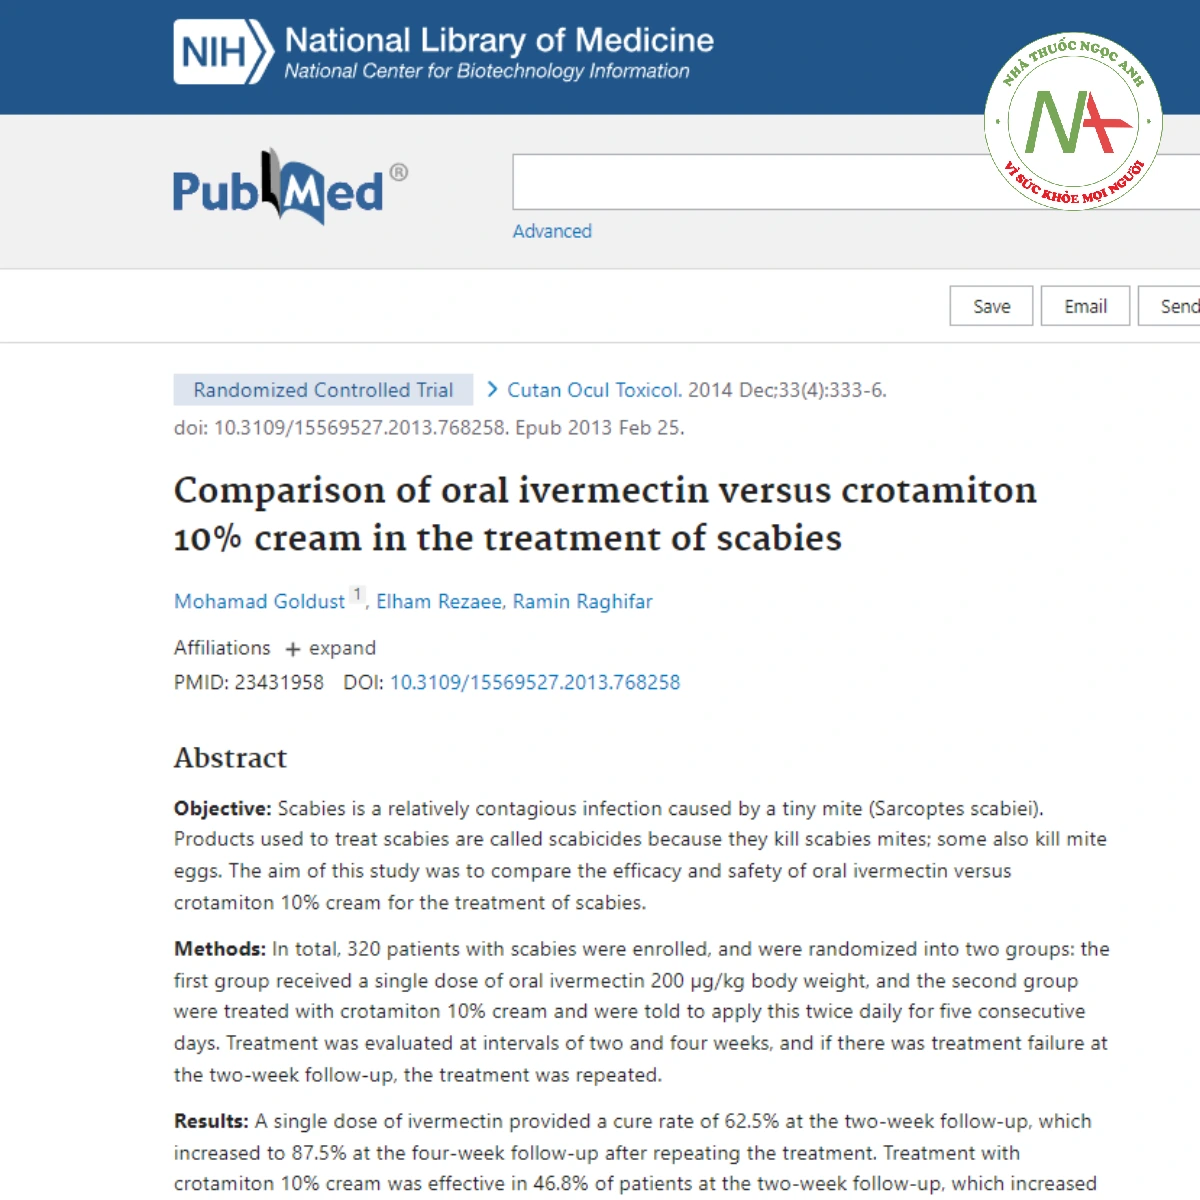 Comparison of oral ivermectin versus crotamiton 10% cream in the treatment of scabies